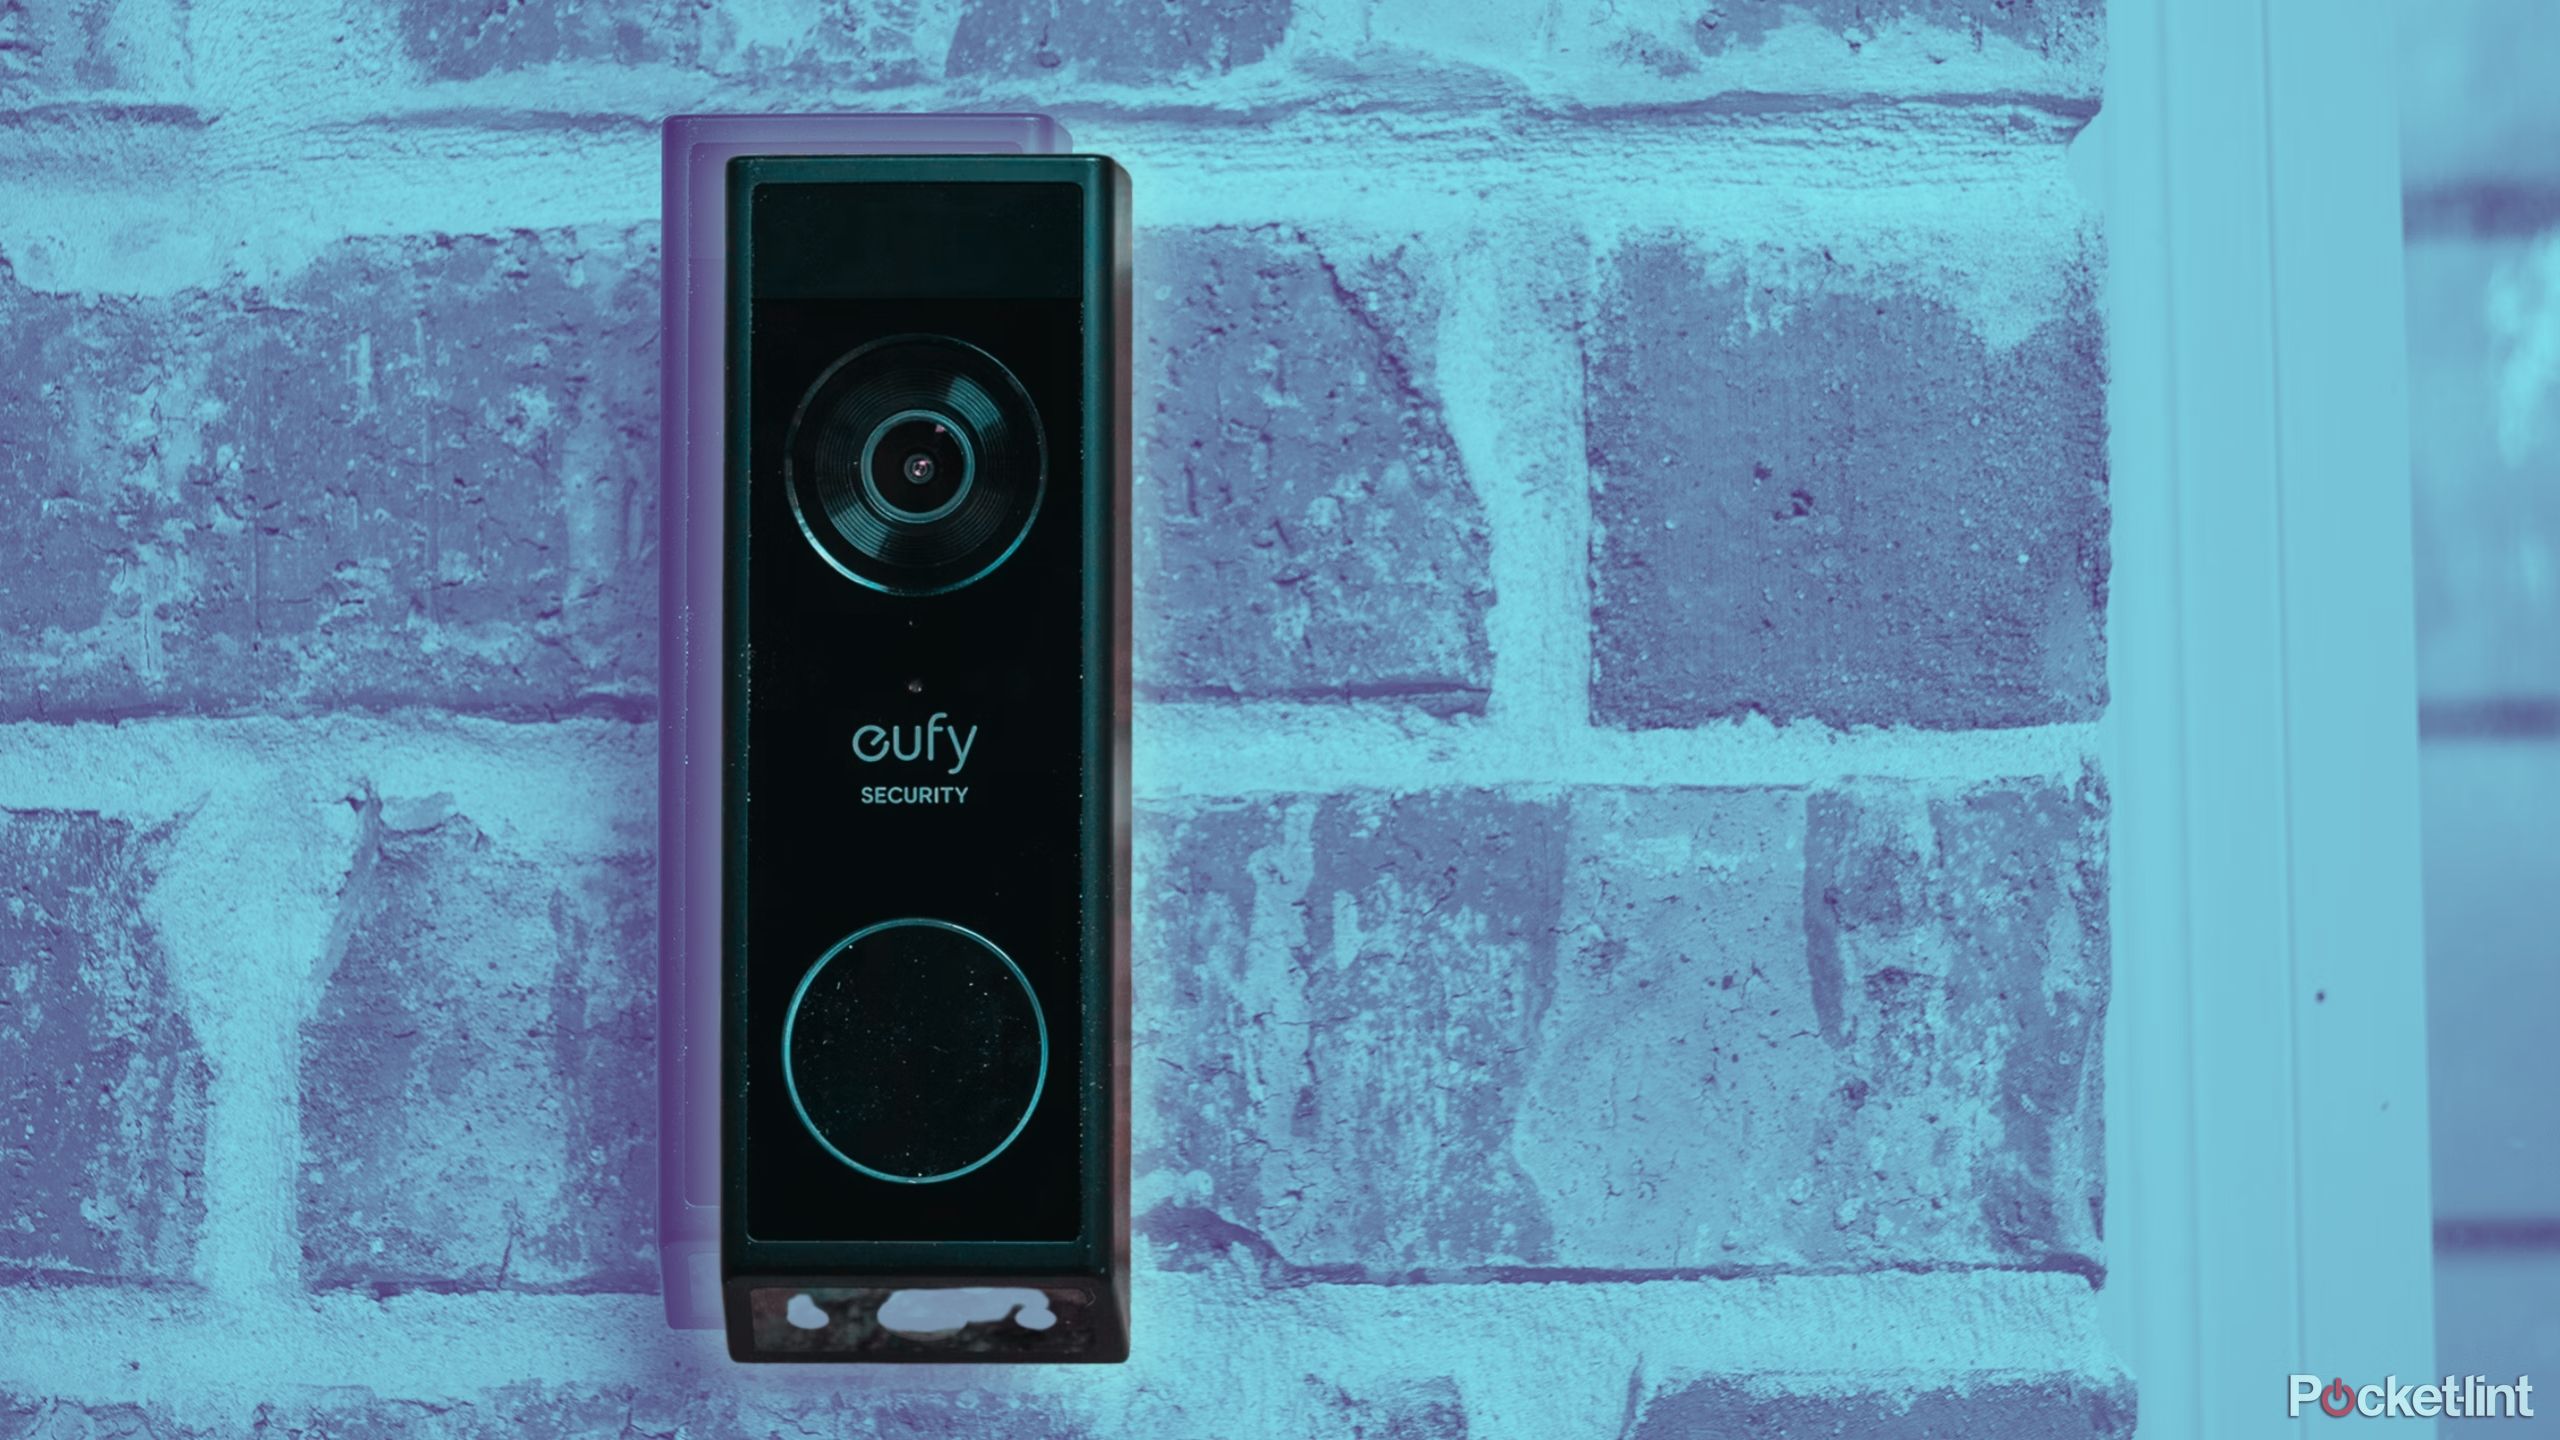 Eufy 2K Video Doorbell Hero against a blue background